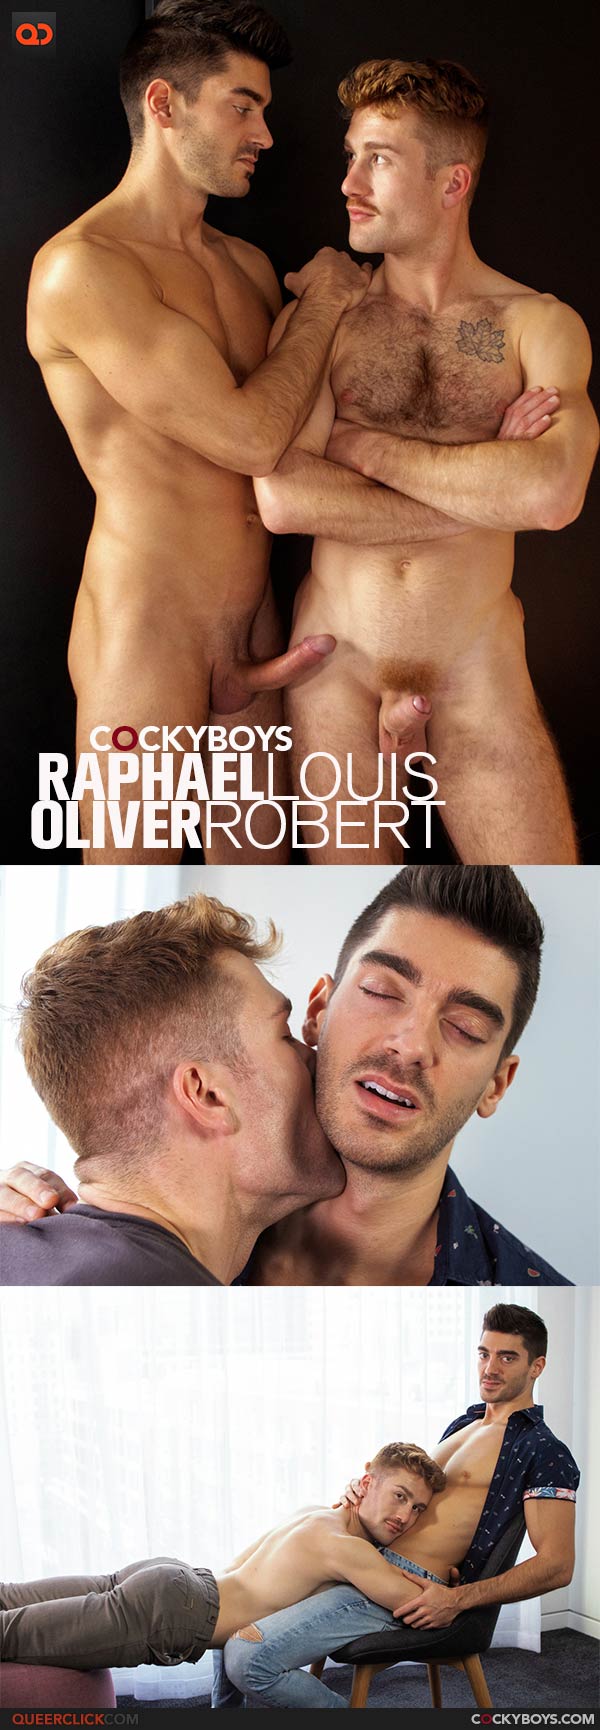 CockyBoys: Raphael Louis and Olivier Robert